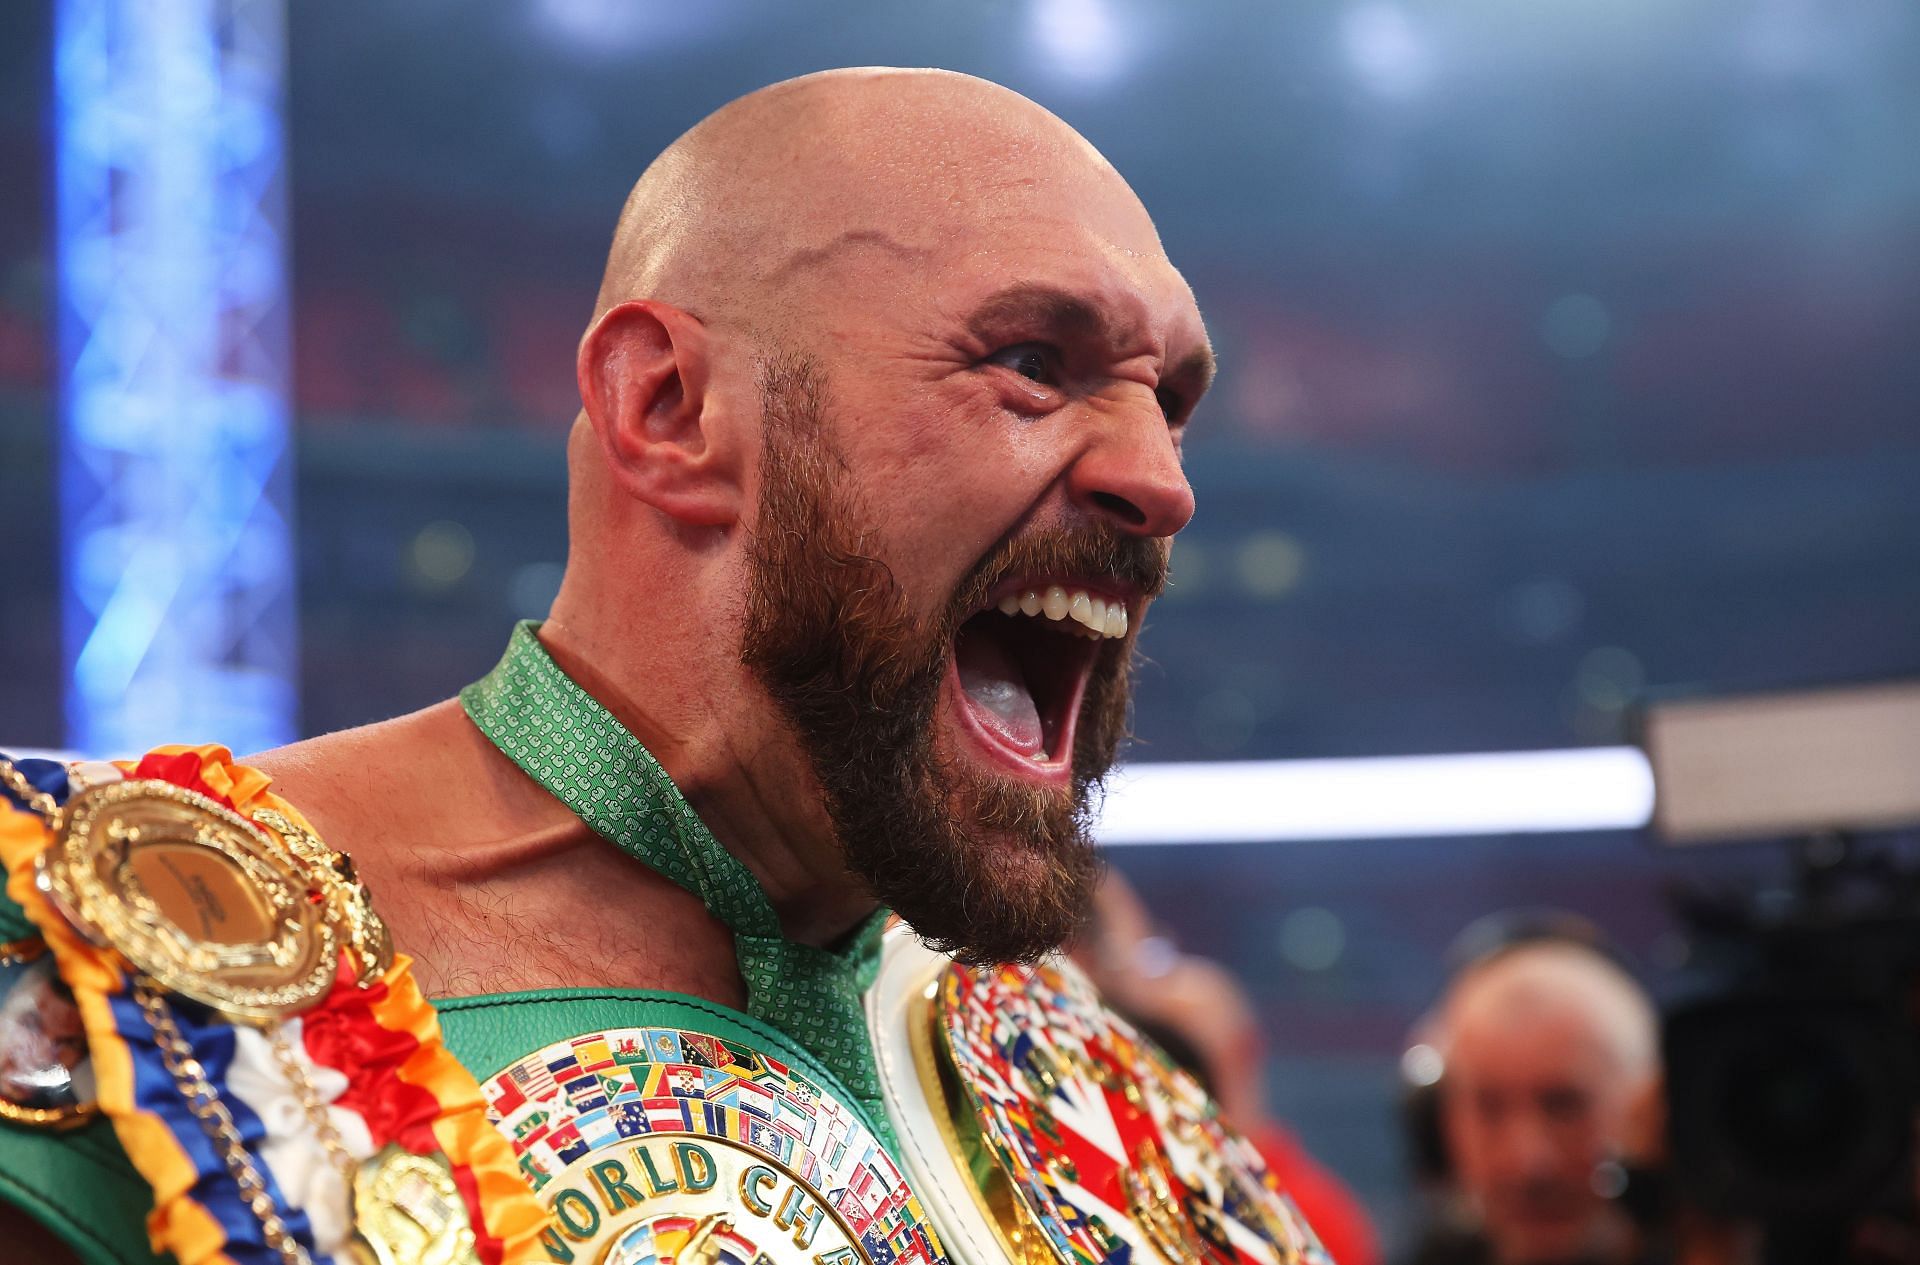 Tyson Fury has confirmed his intention to walk away from the boxing ring.